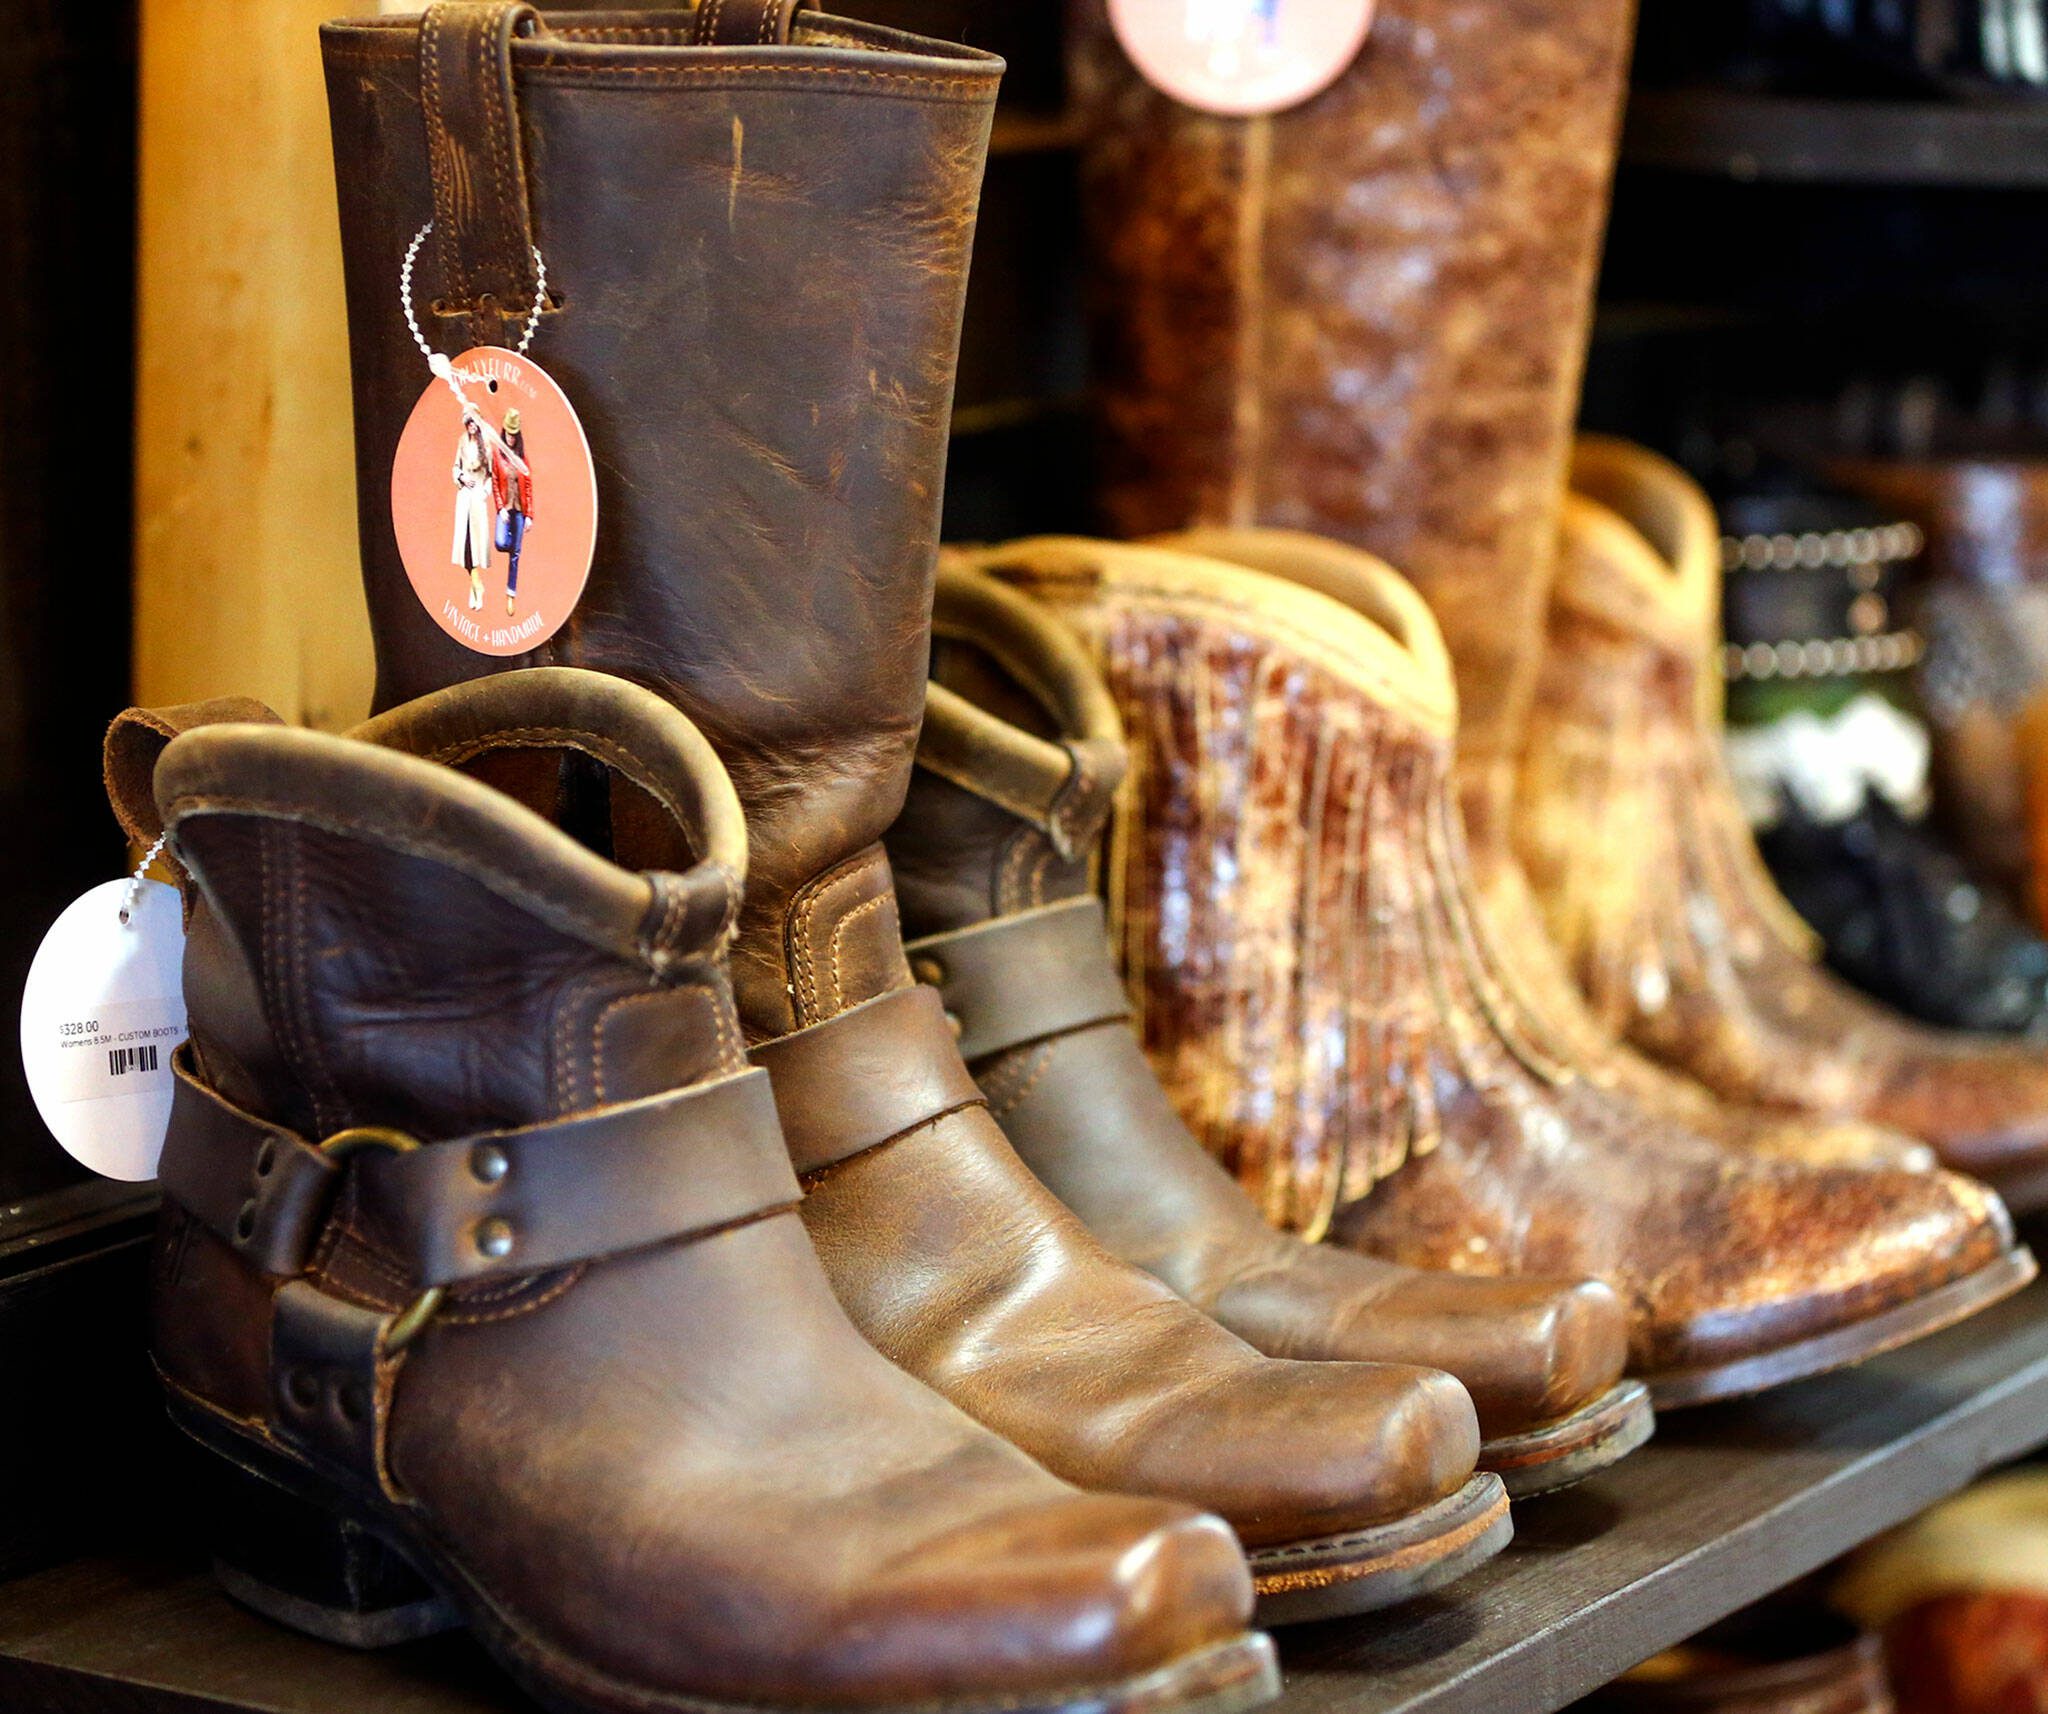 FauxyFurr in Arlington up-cycles boots, adding custom trim. (Kevin Clark / The Herald)